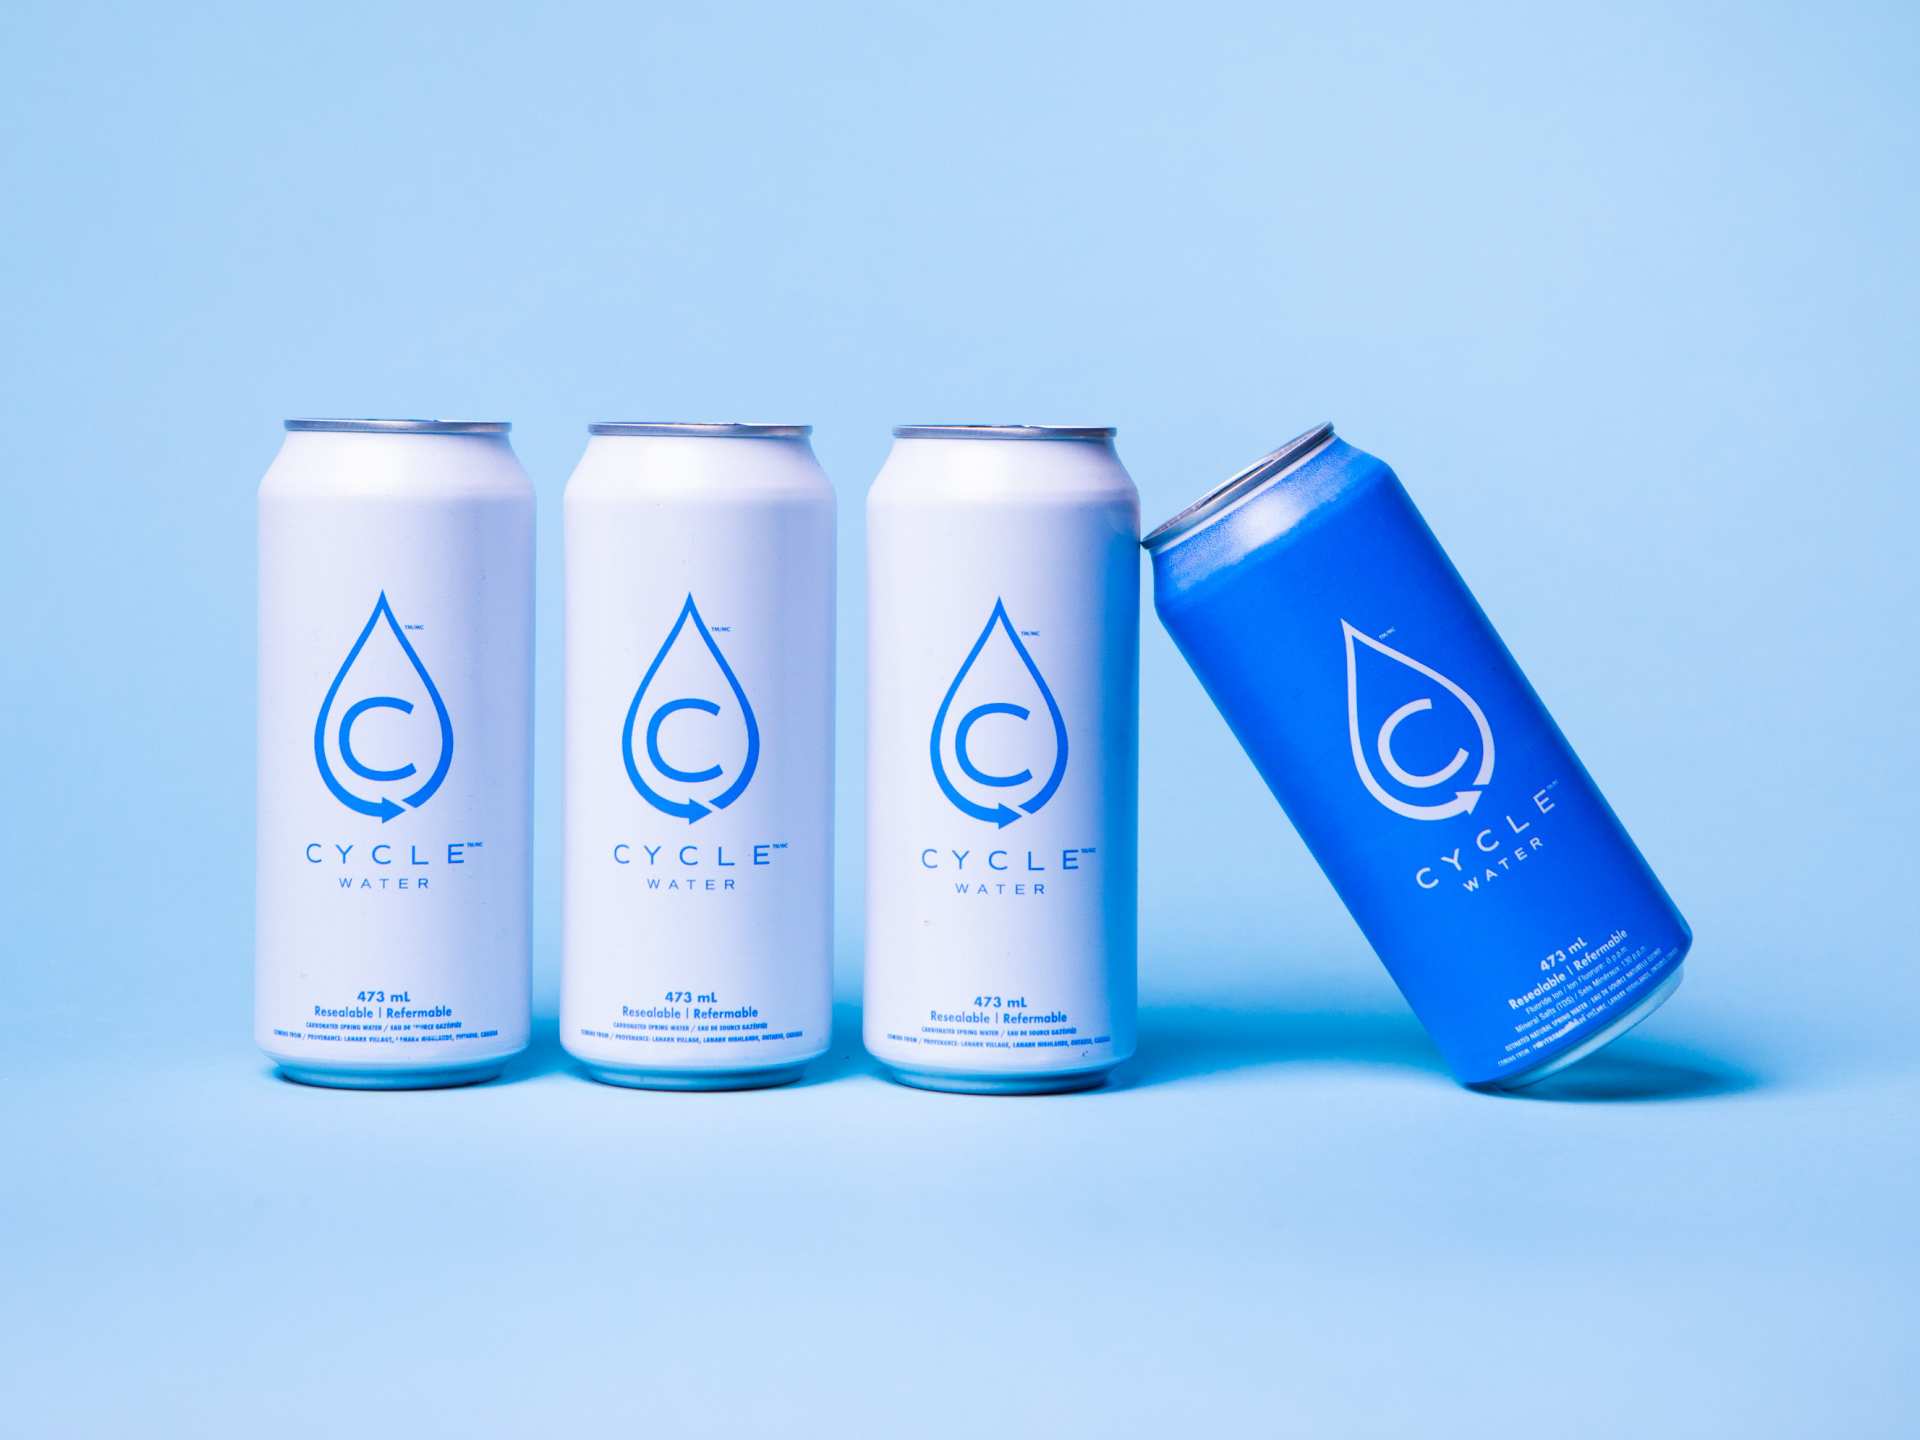 Sparkling Water | Cans of Ontario-based Cycle water